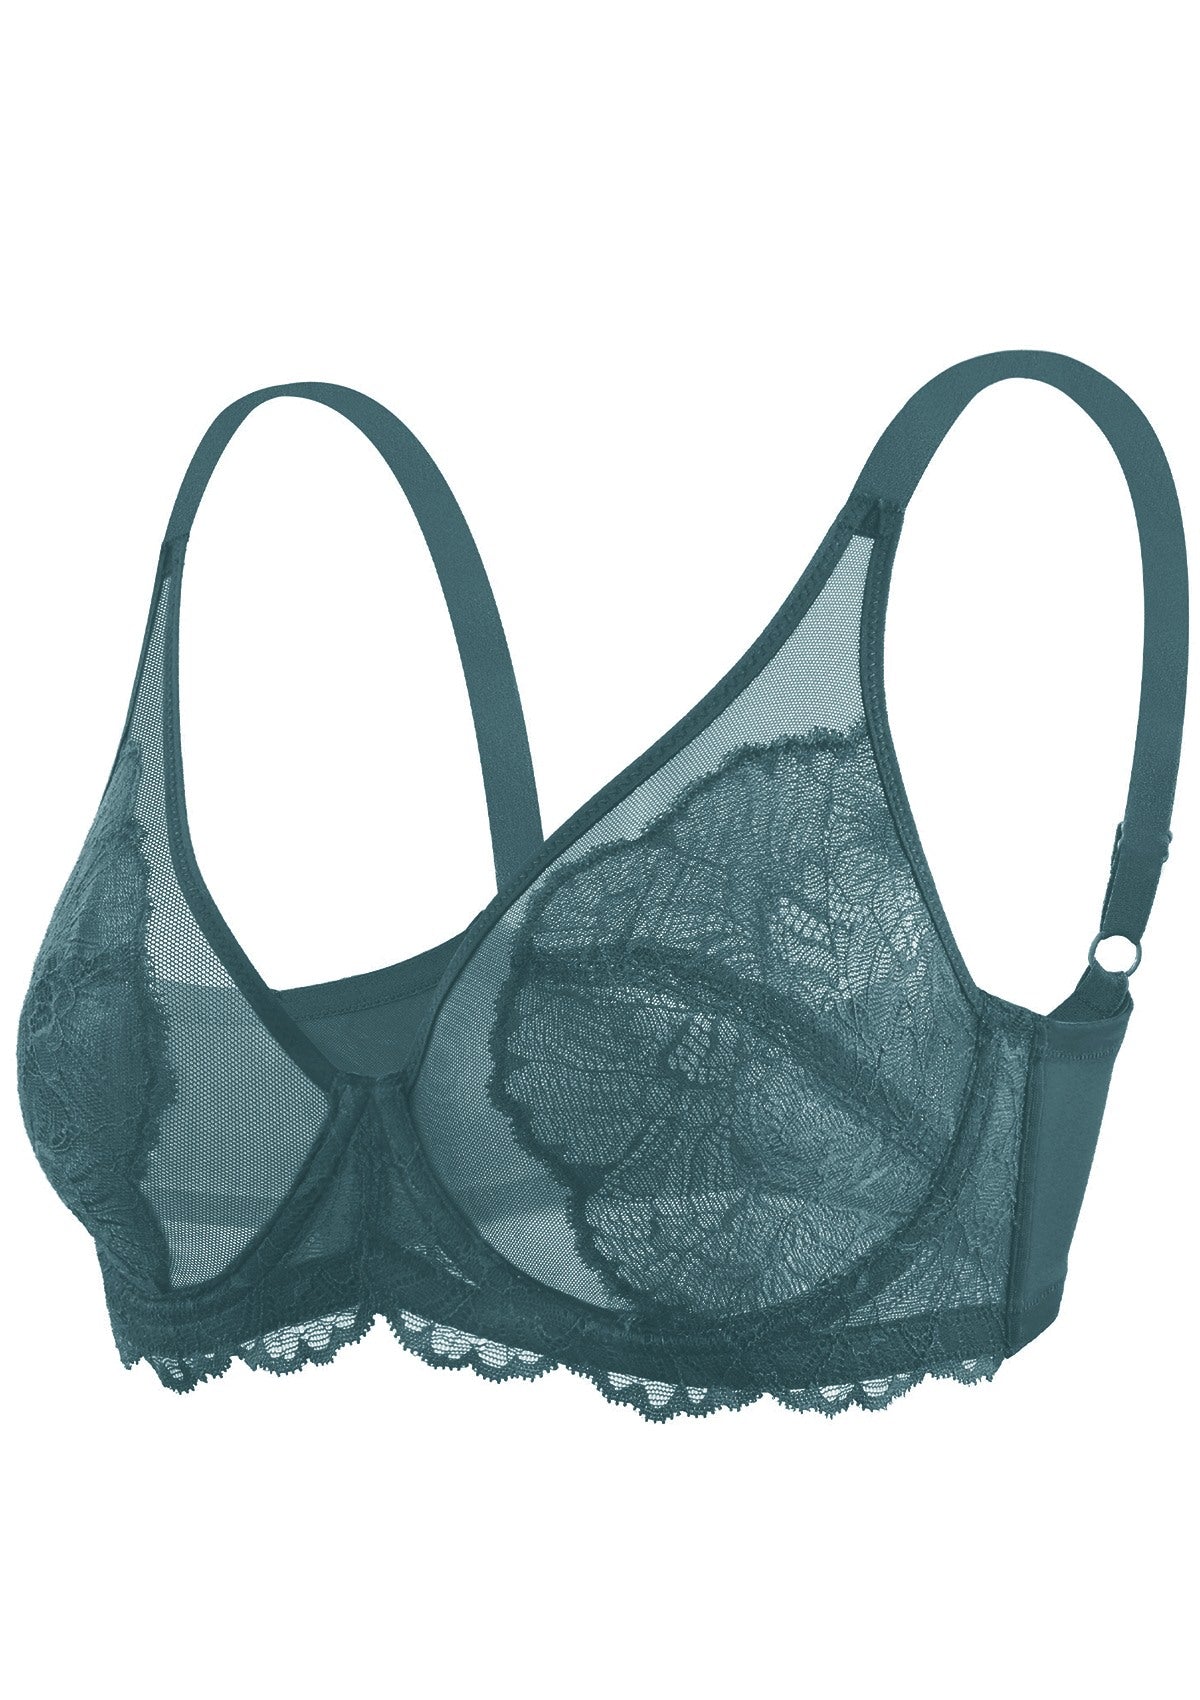 HSIA Blossom Full Figure See-Through Lace Bra For Side And Back Fat - Balsam Blue / 42 / C